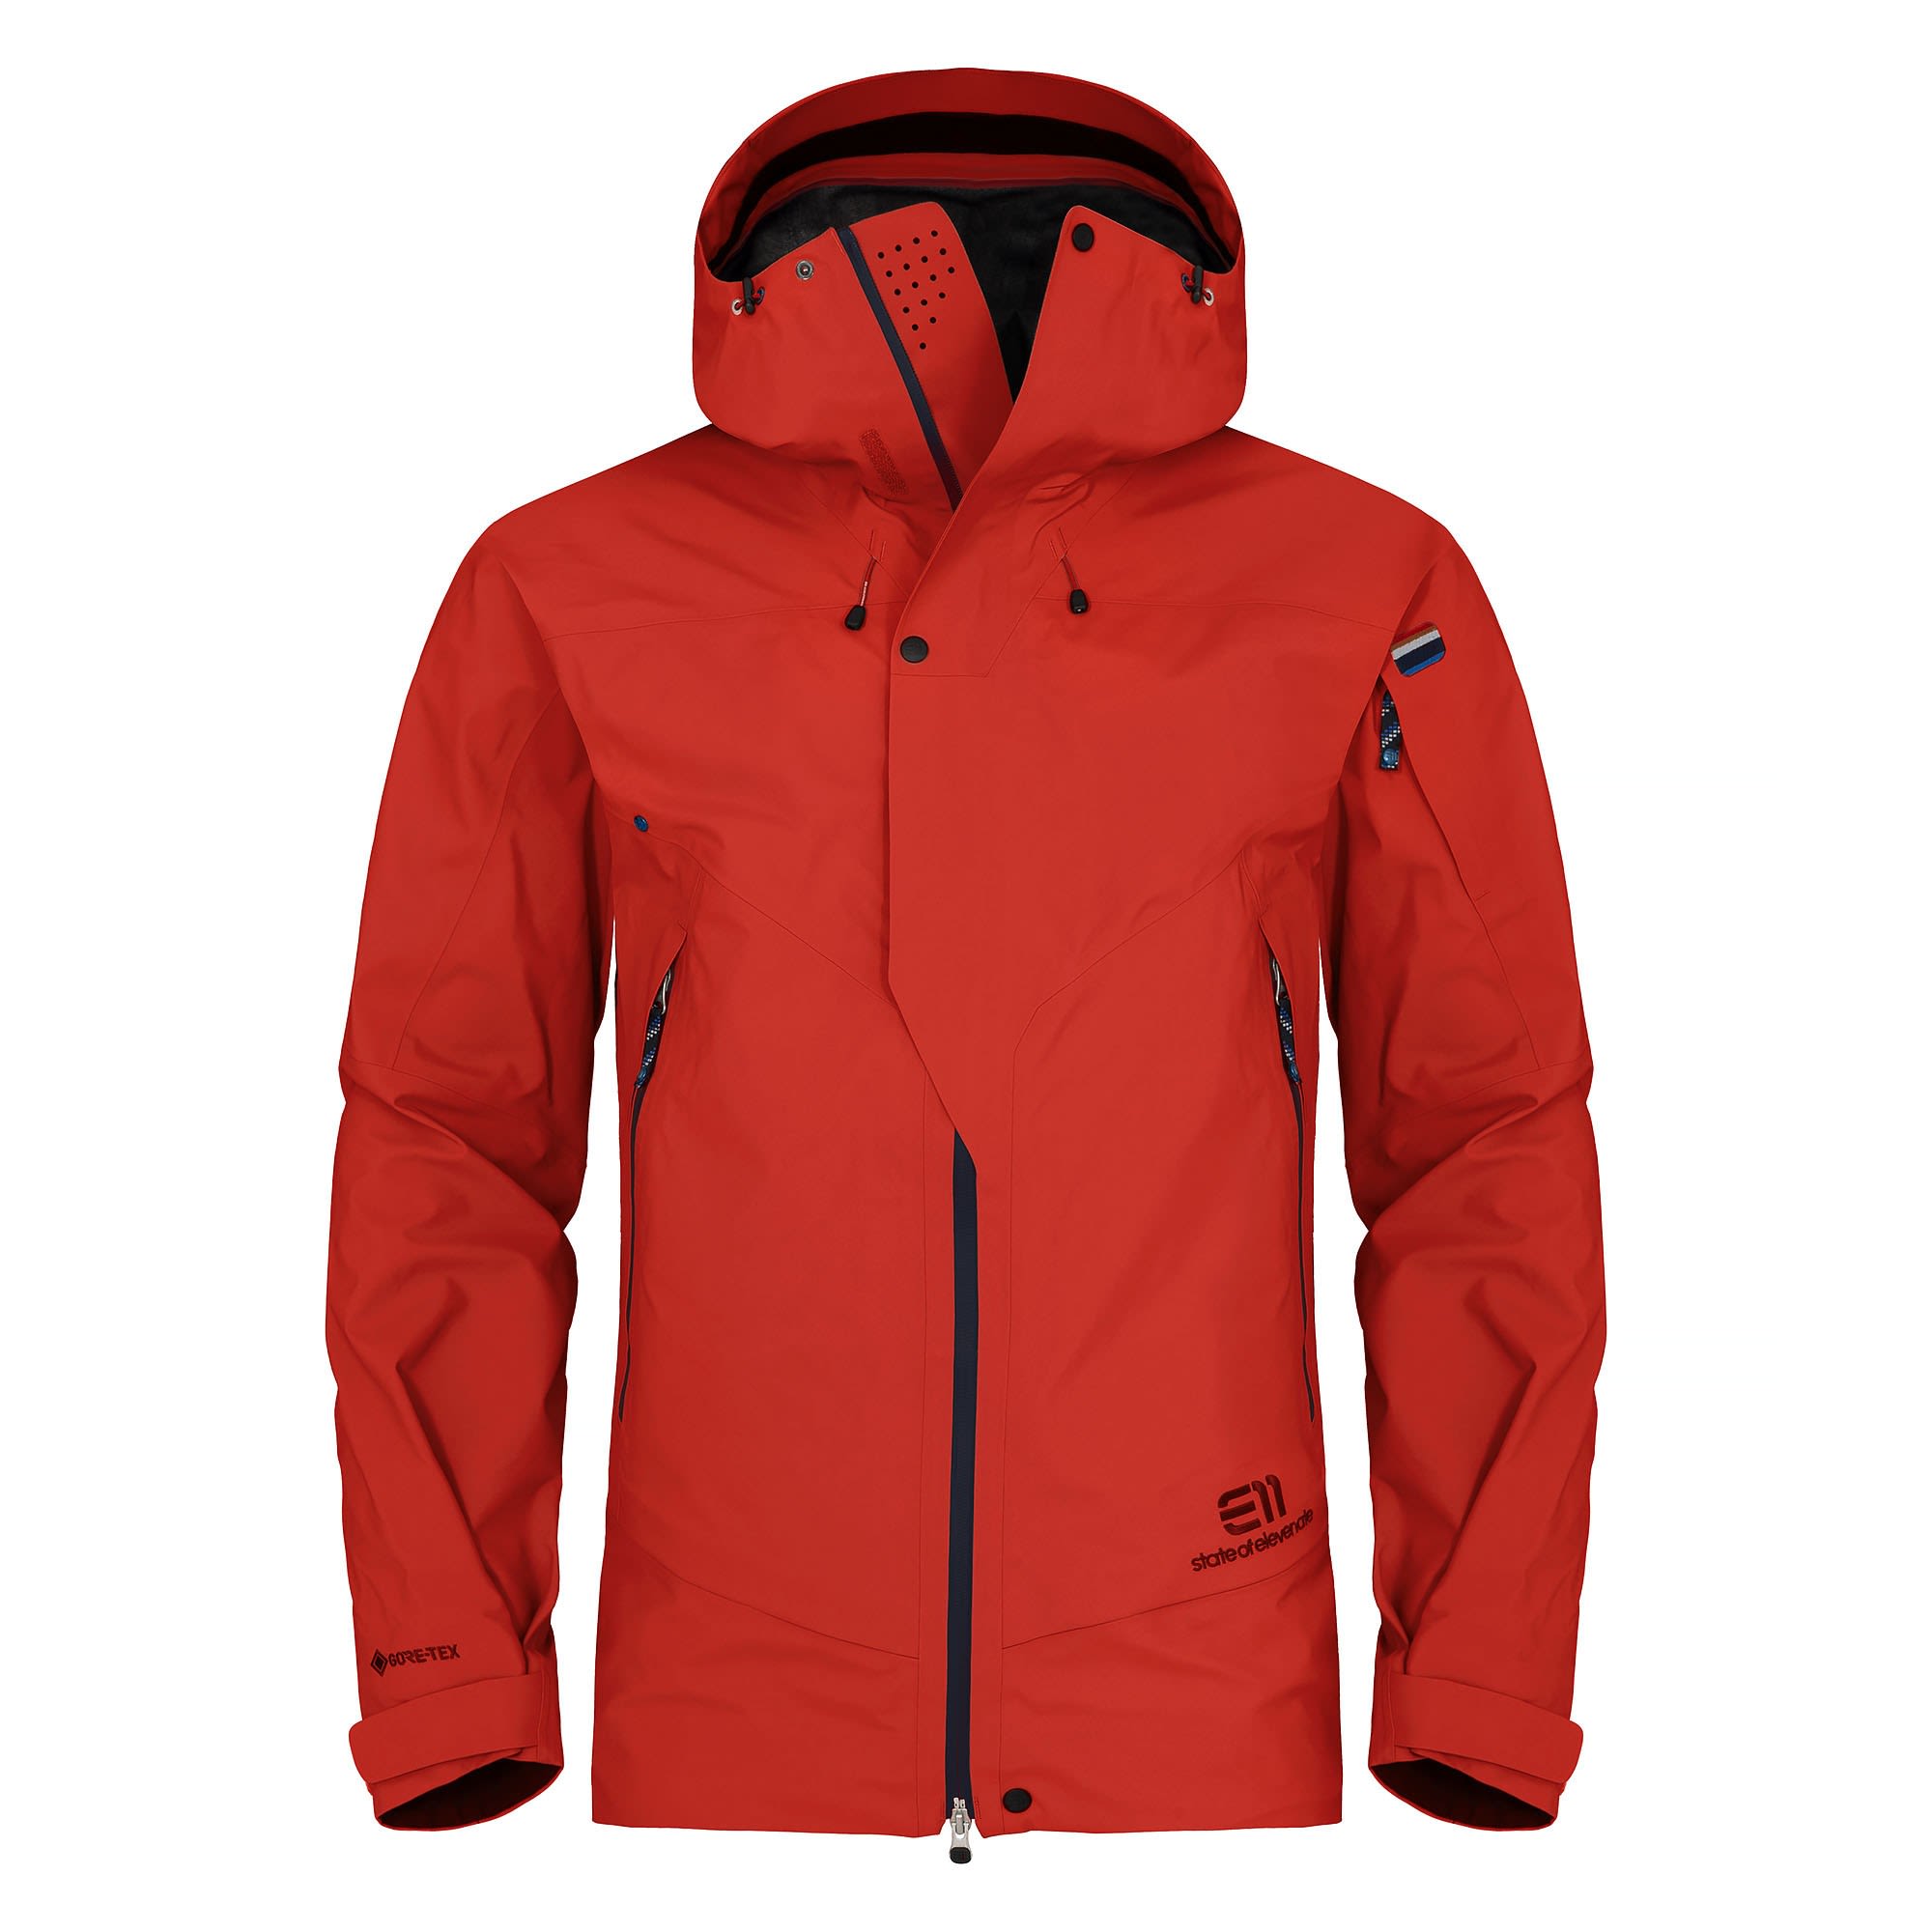 Elevenate Pure Jacket Rot- Male Gore-Tex(R) Anoraks- Grsse M - Farbe Red Glow